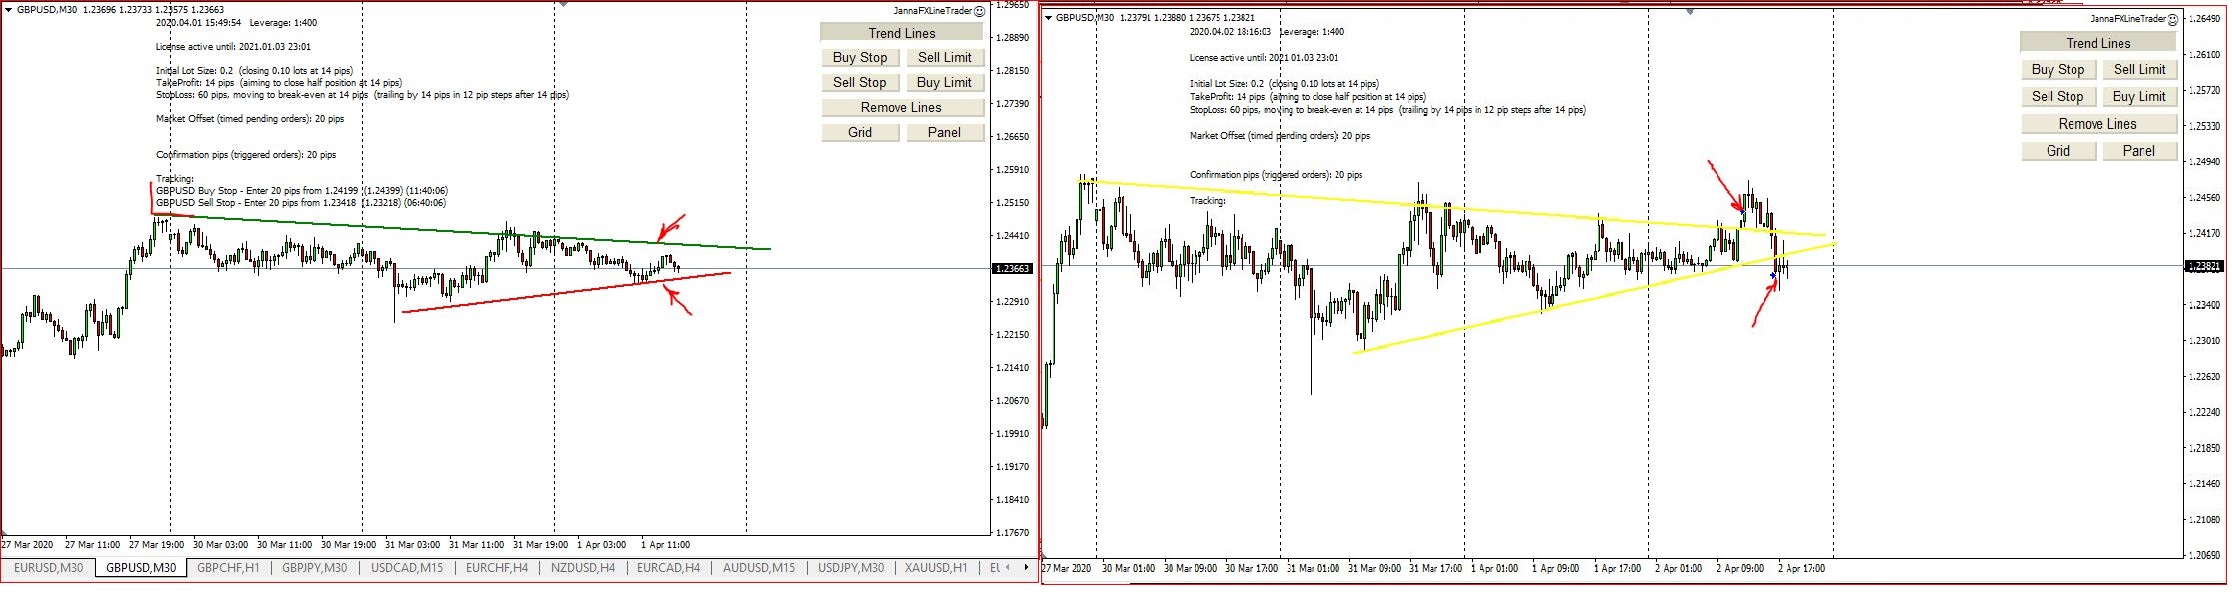 2 Days of Forex Trading, Examples of My Trades